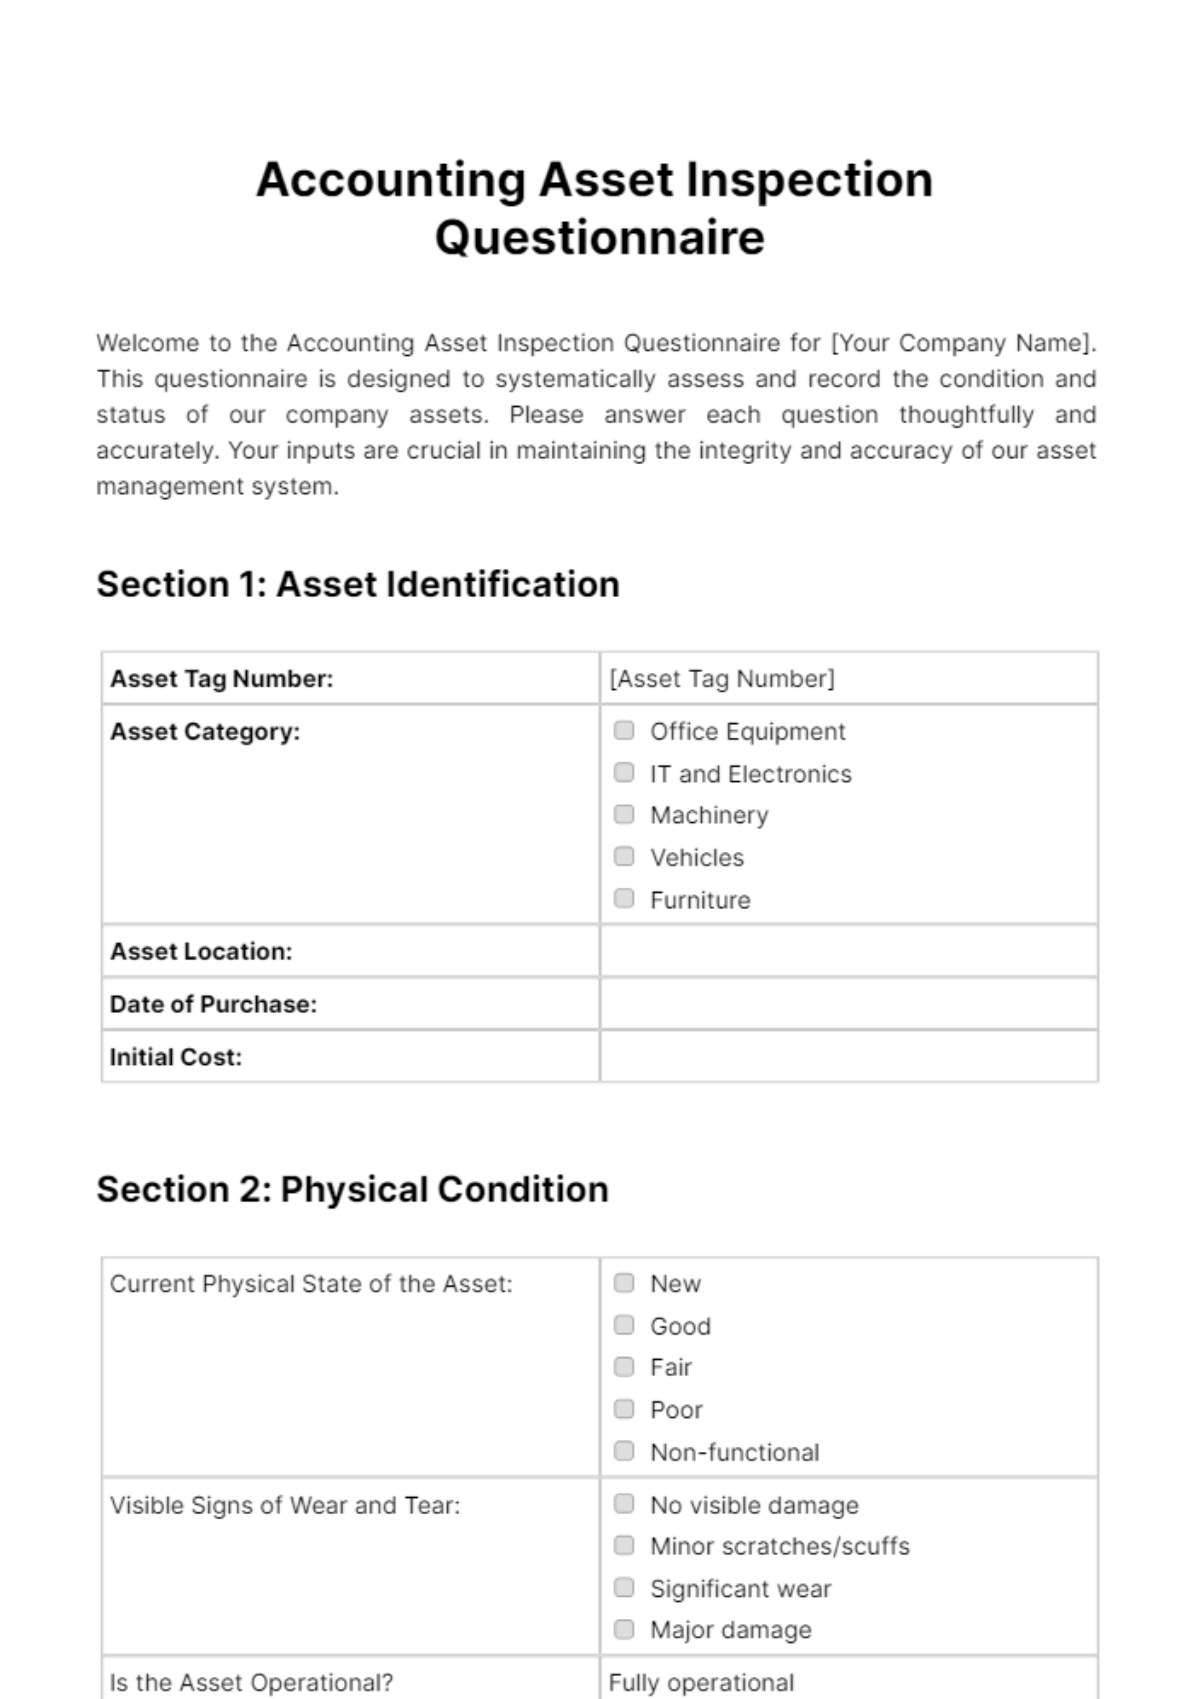 Accounting Asset Inspection Questionnaire Template